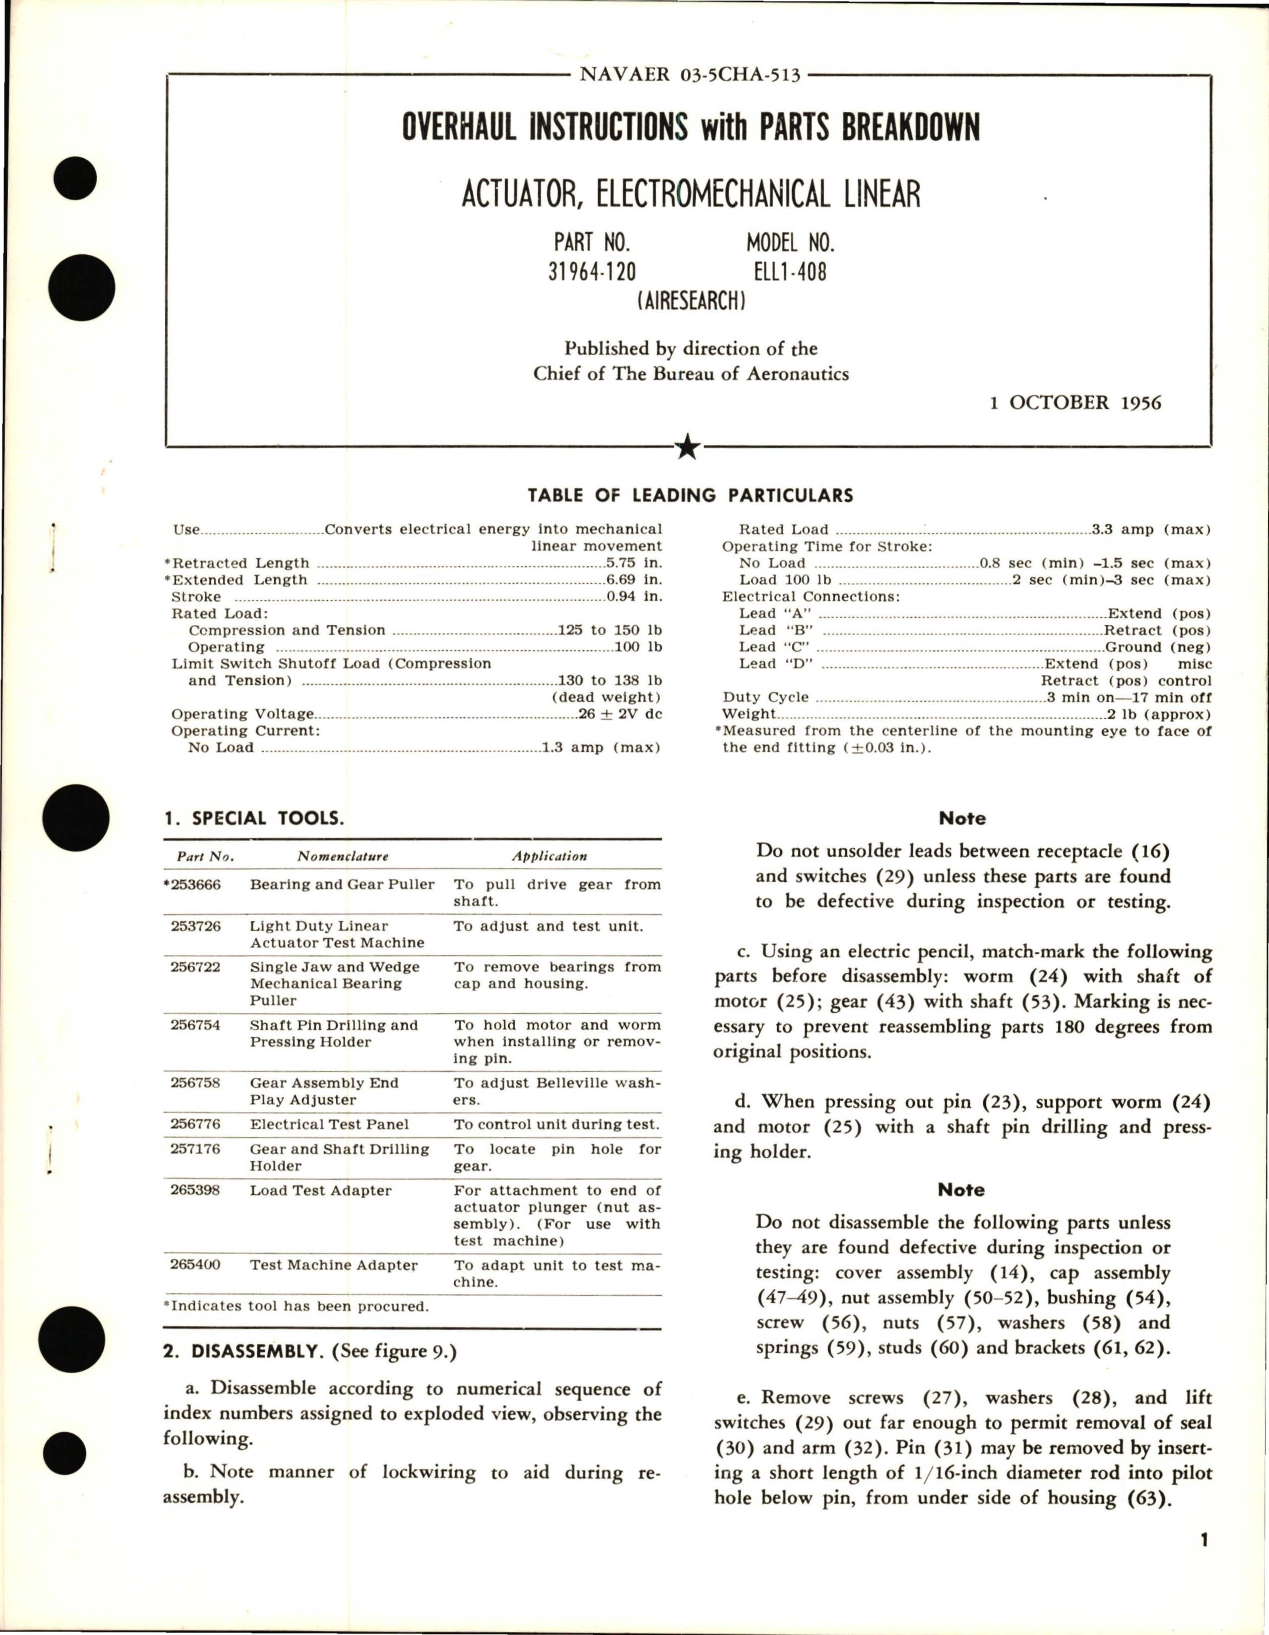 Sample page 1 from AirCorps Library document: Overhaul Instructions with Parts Breakdown for Electromechanical Linear Actuator - Part 31964-120 - Model ELL1-408 